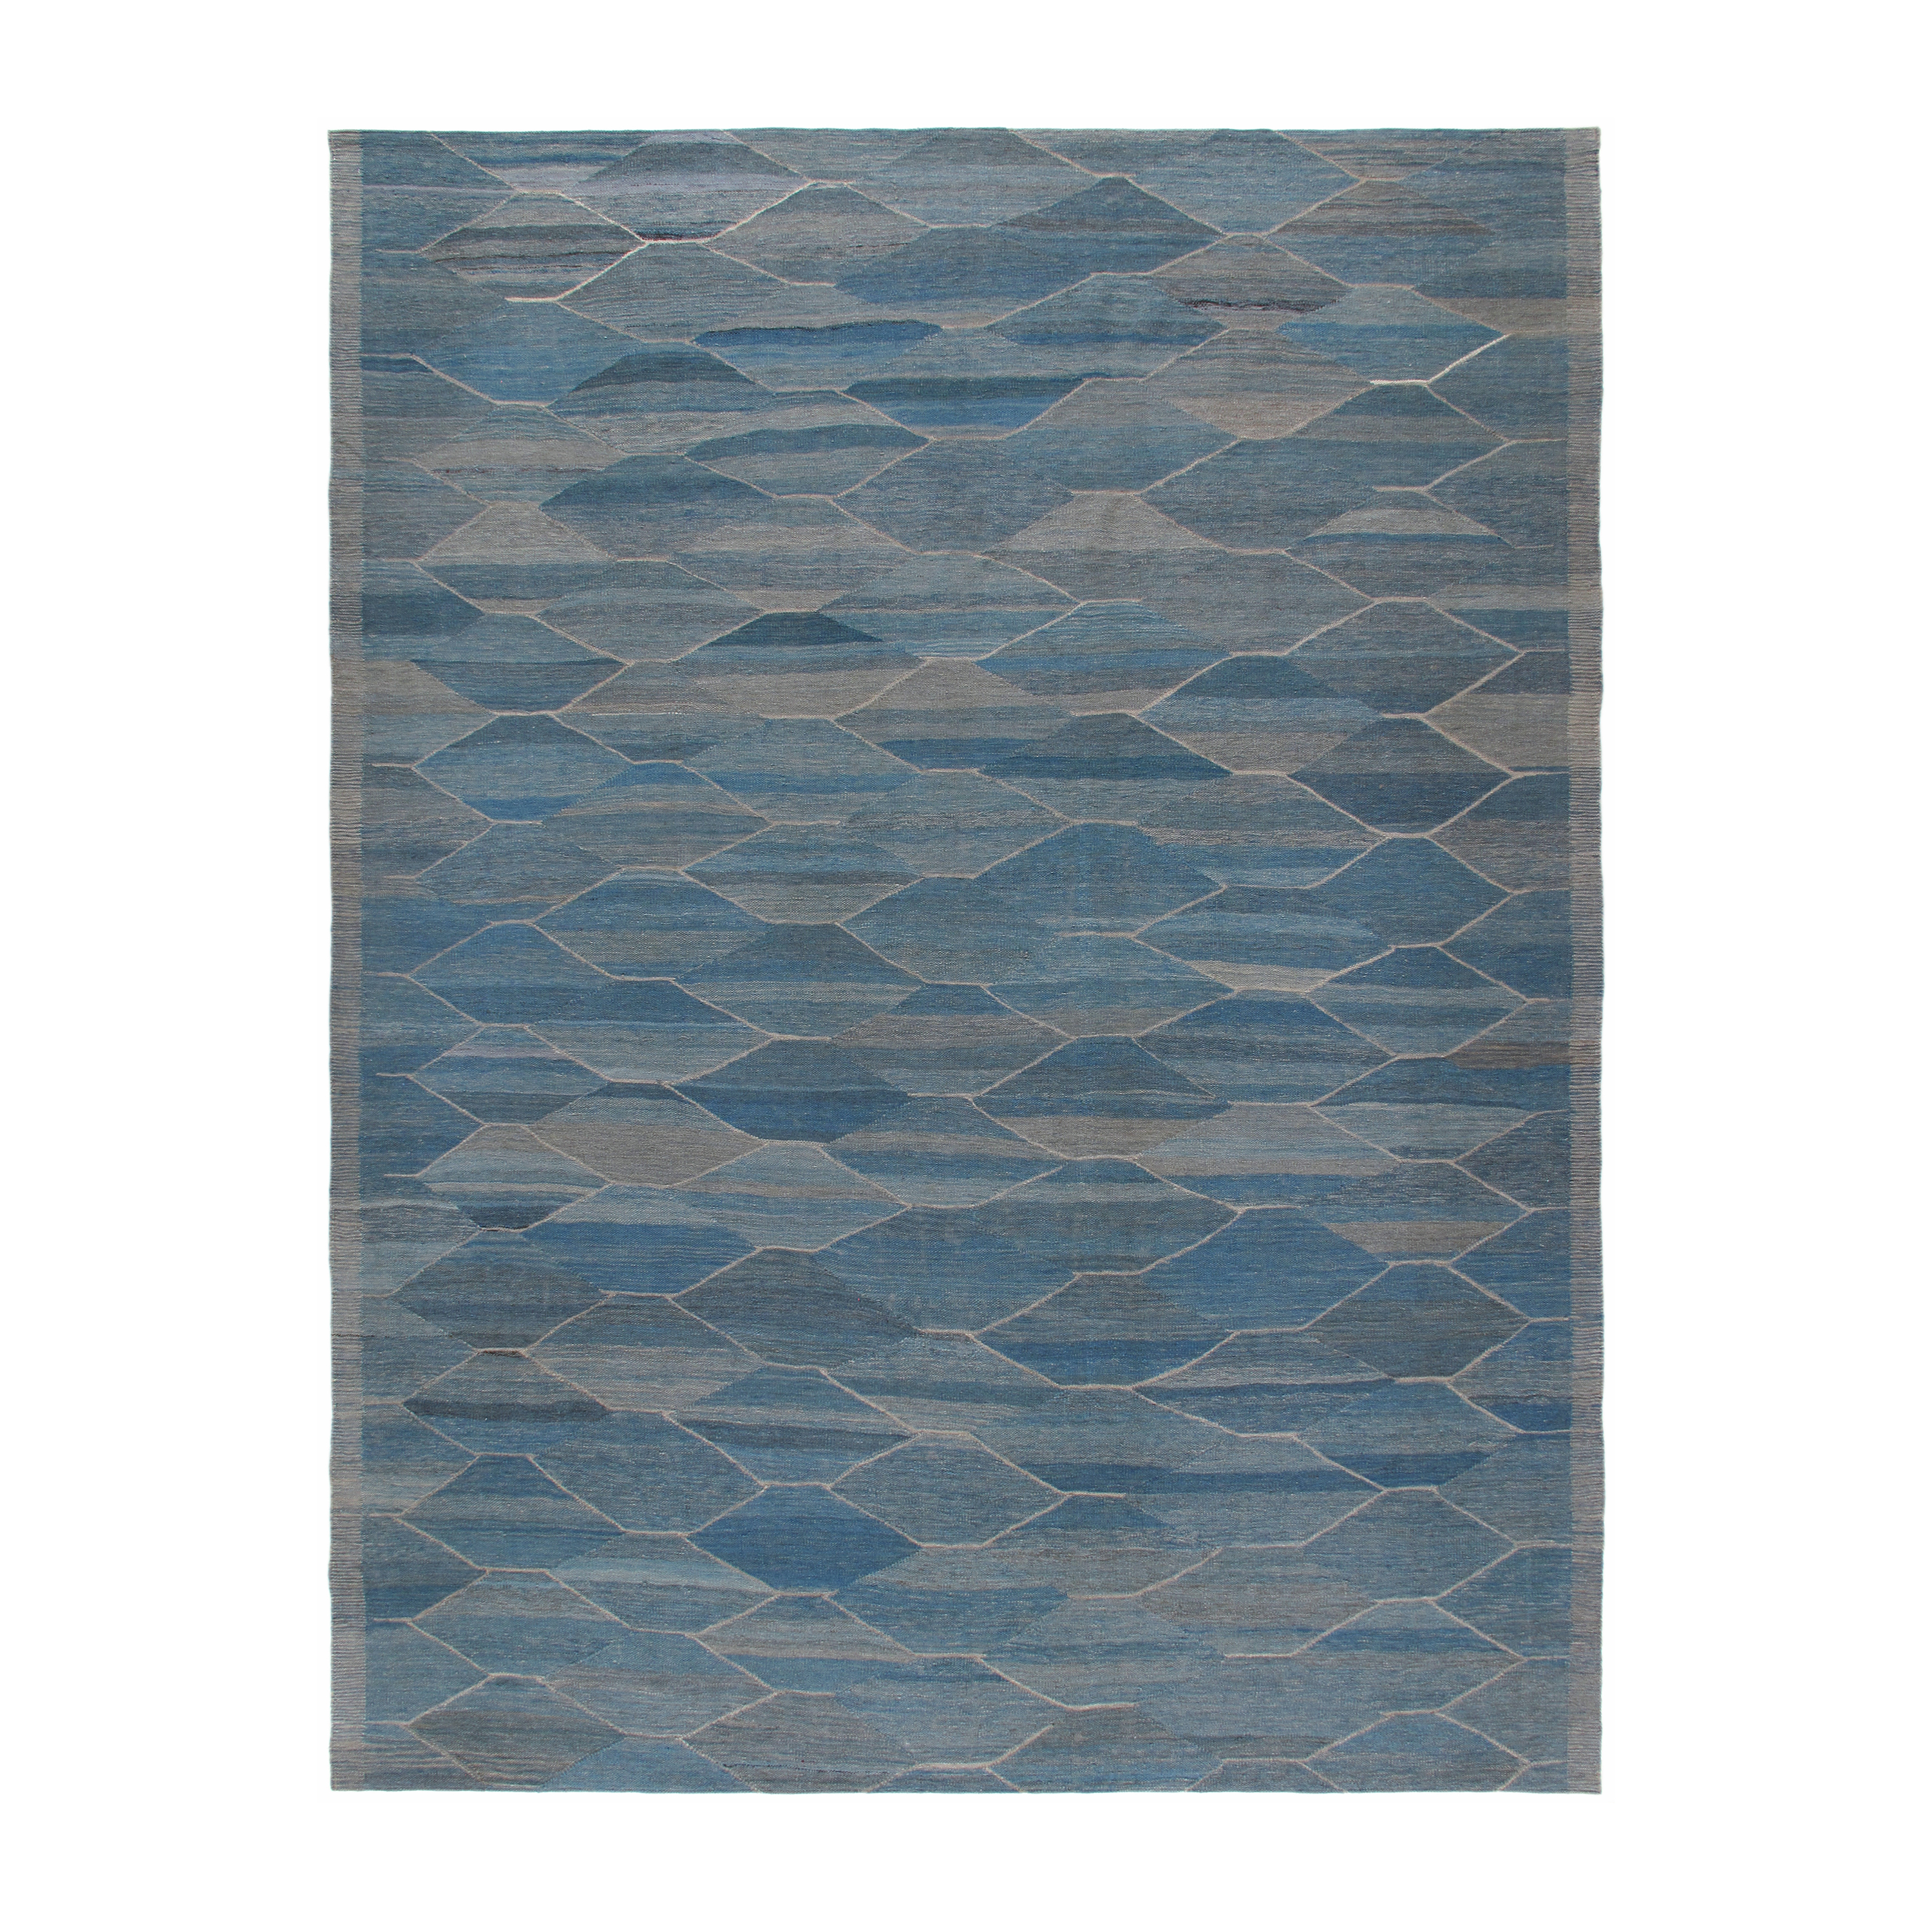 This Shiraz rug is handwoven and its made of 100% wool.